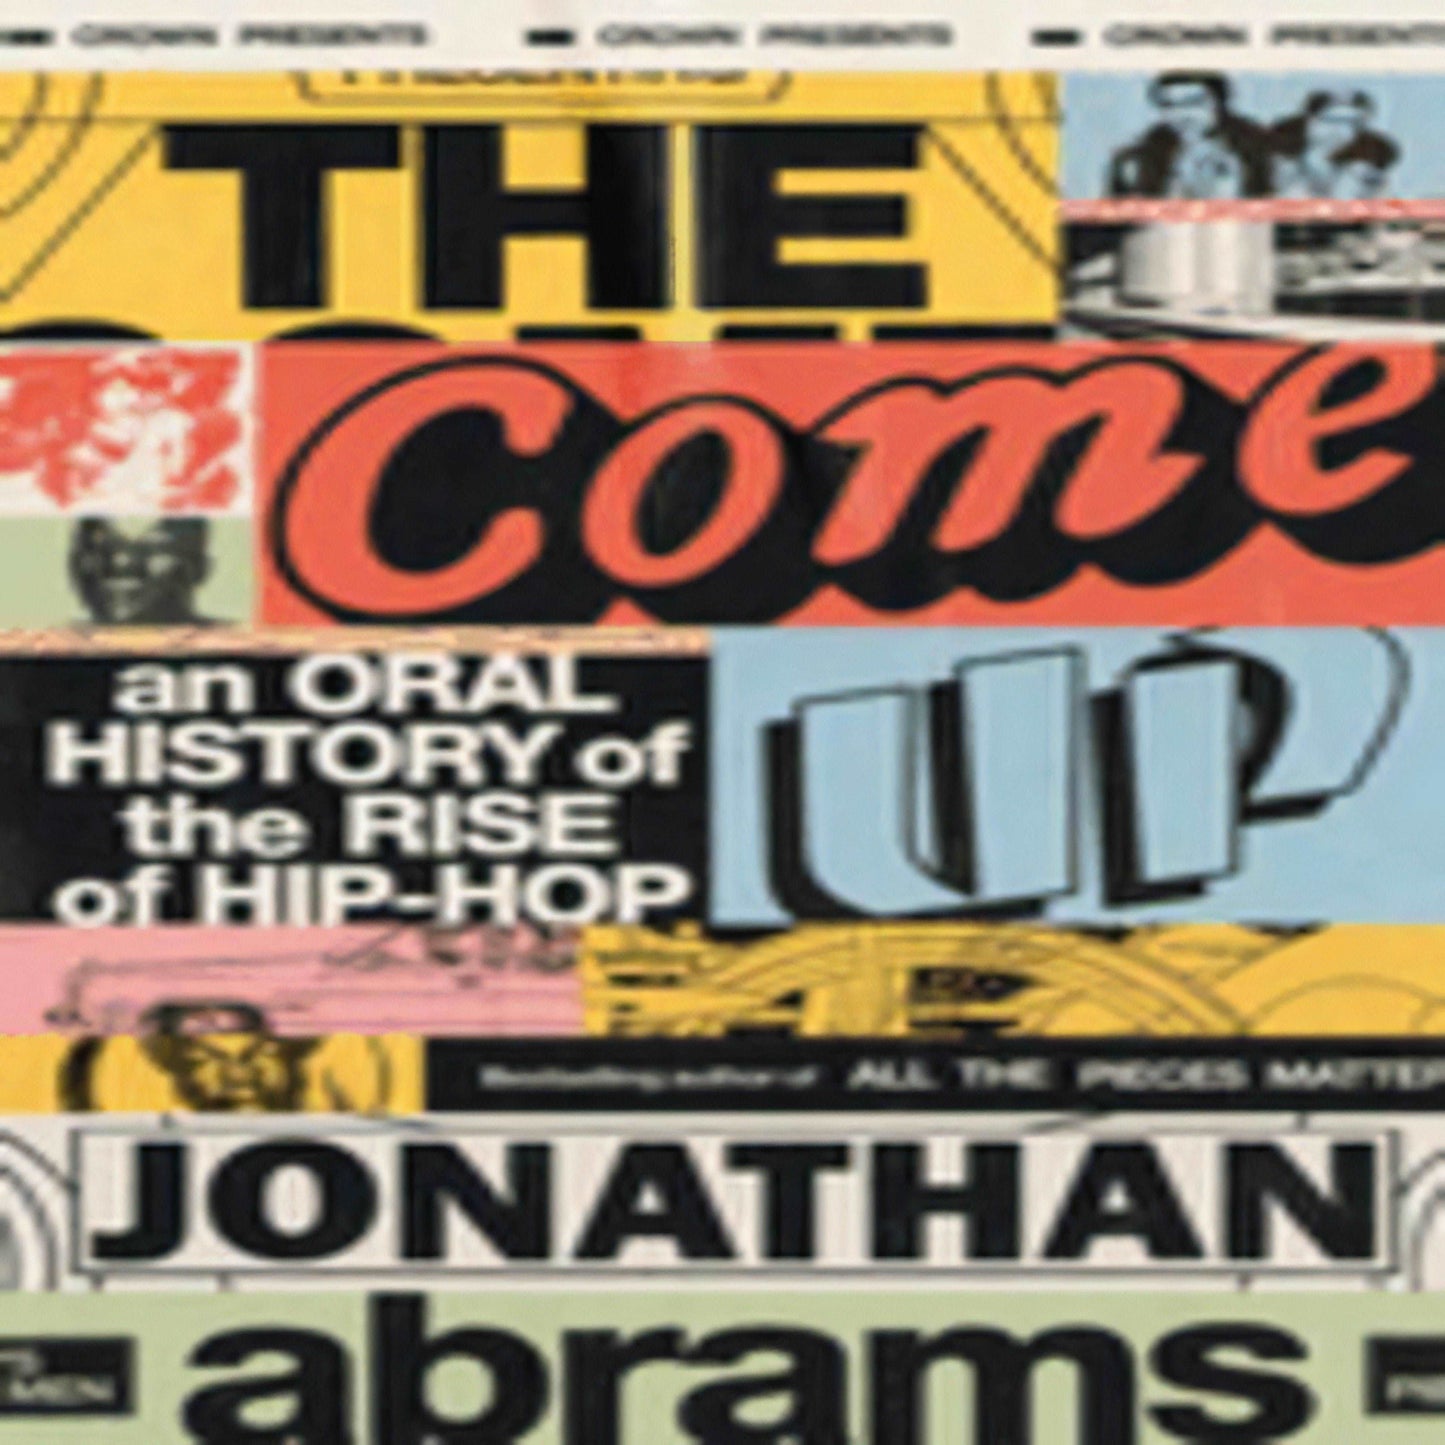 The Come Up: An Oral History of the Rise of Hip-Hop54-12622-1984825135DPGBOOKSTORE.COM. Today's Bestsellers.